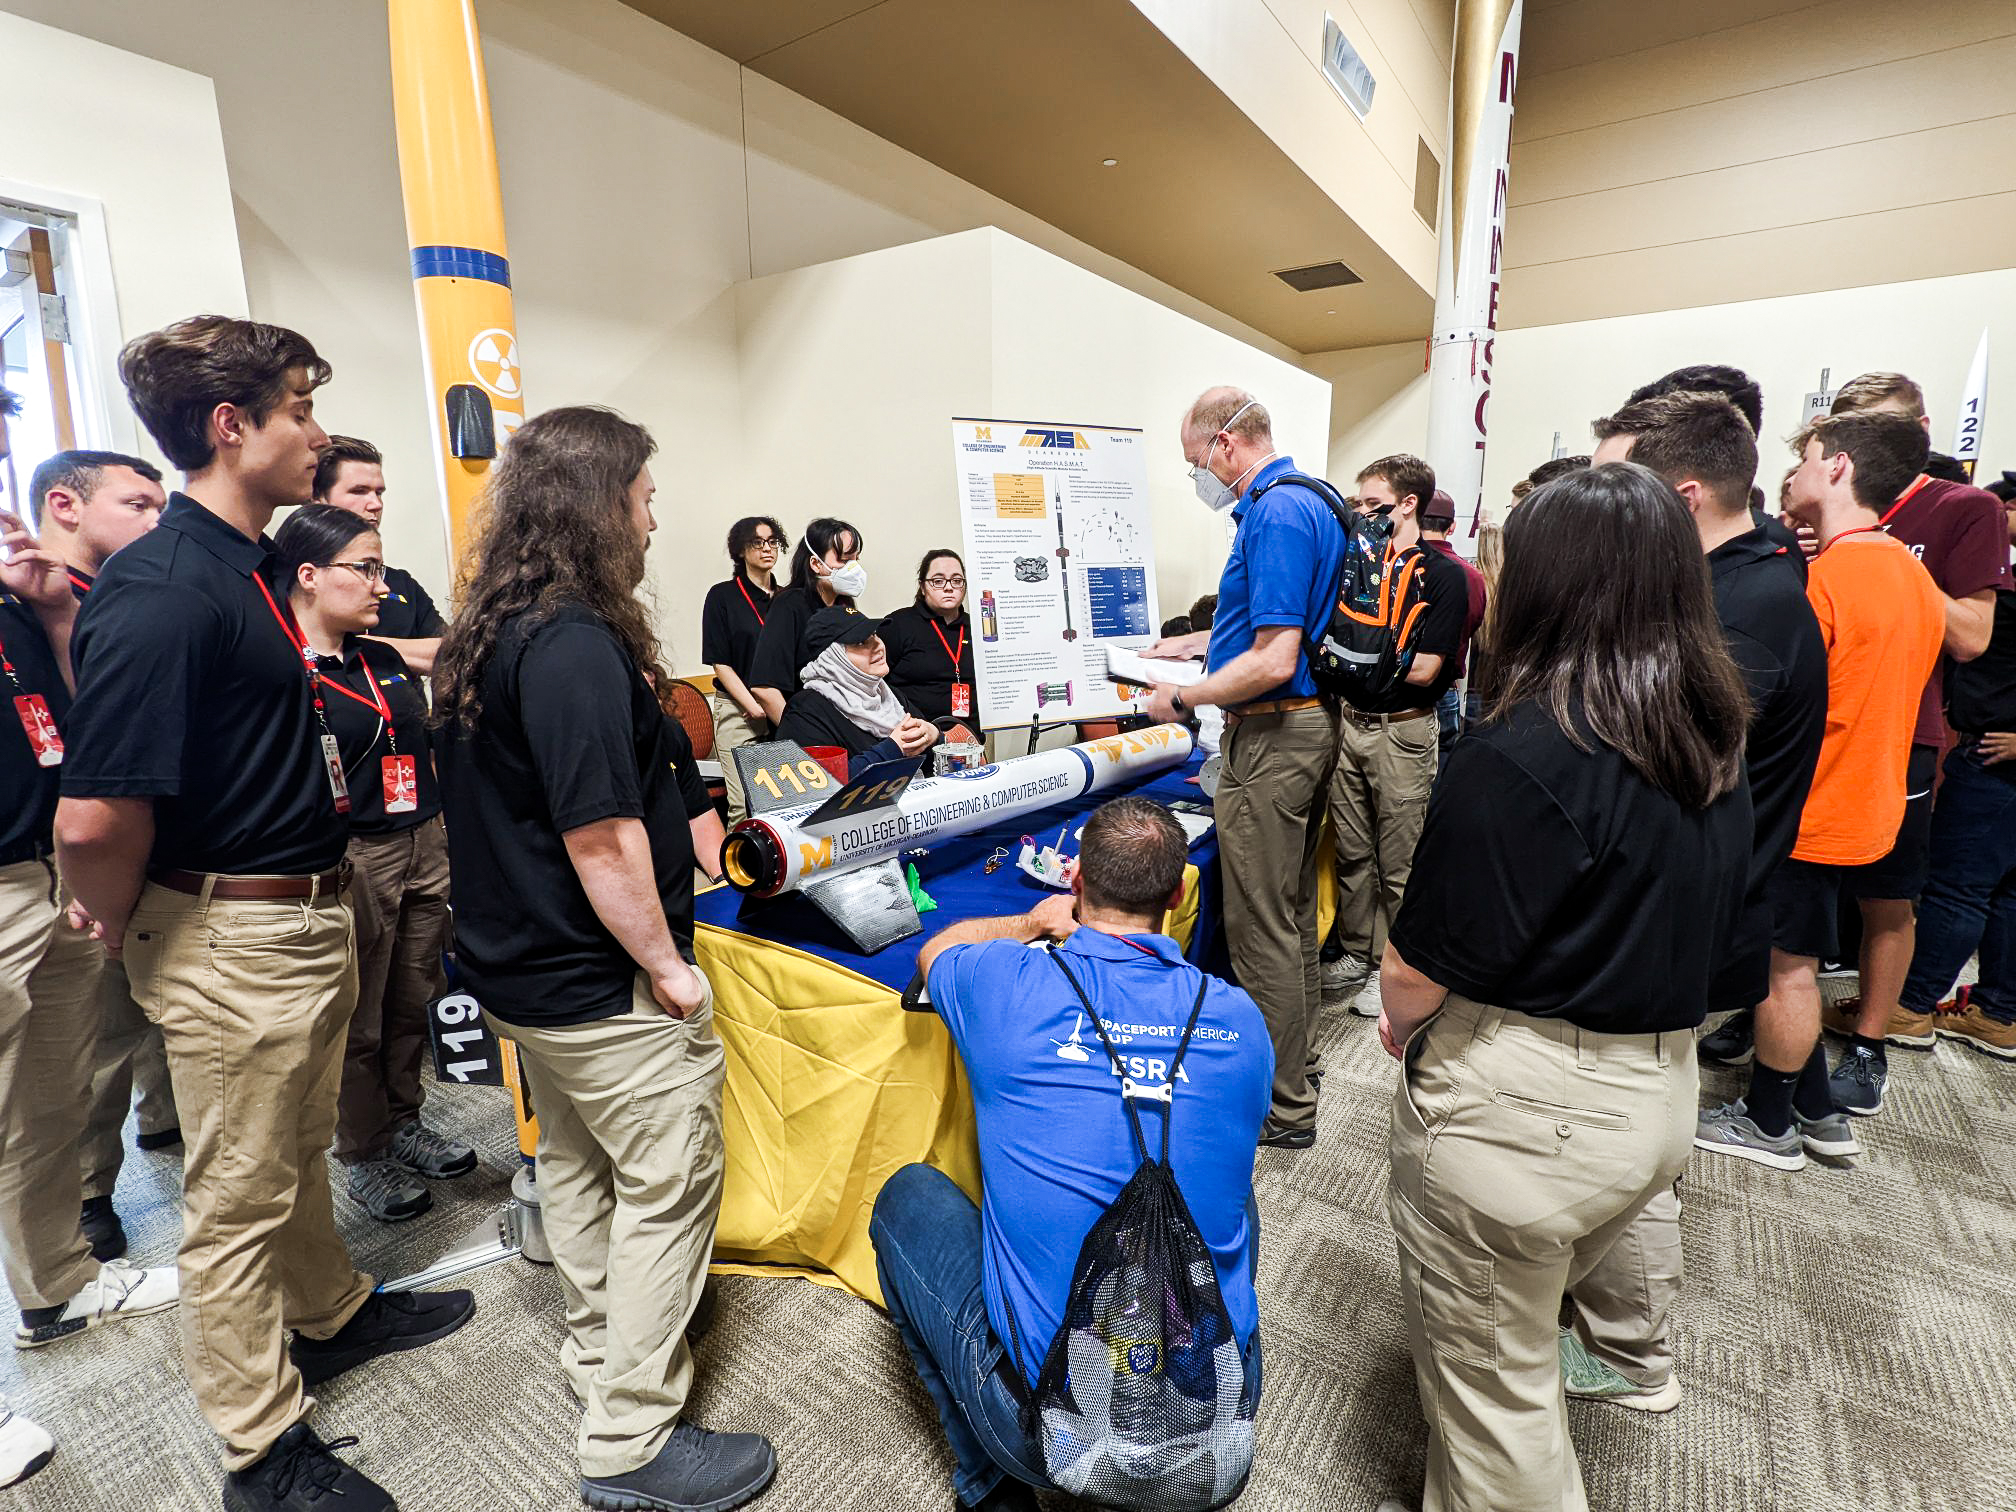 Members of the UM-Dearborn rocket team show off their rocket at a poster session at the 2022 Spaceport America Cup.